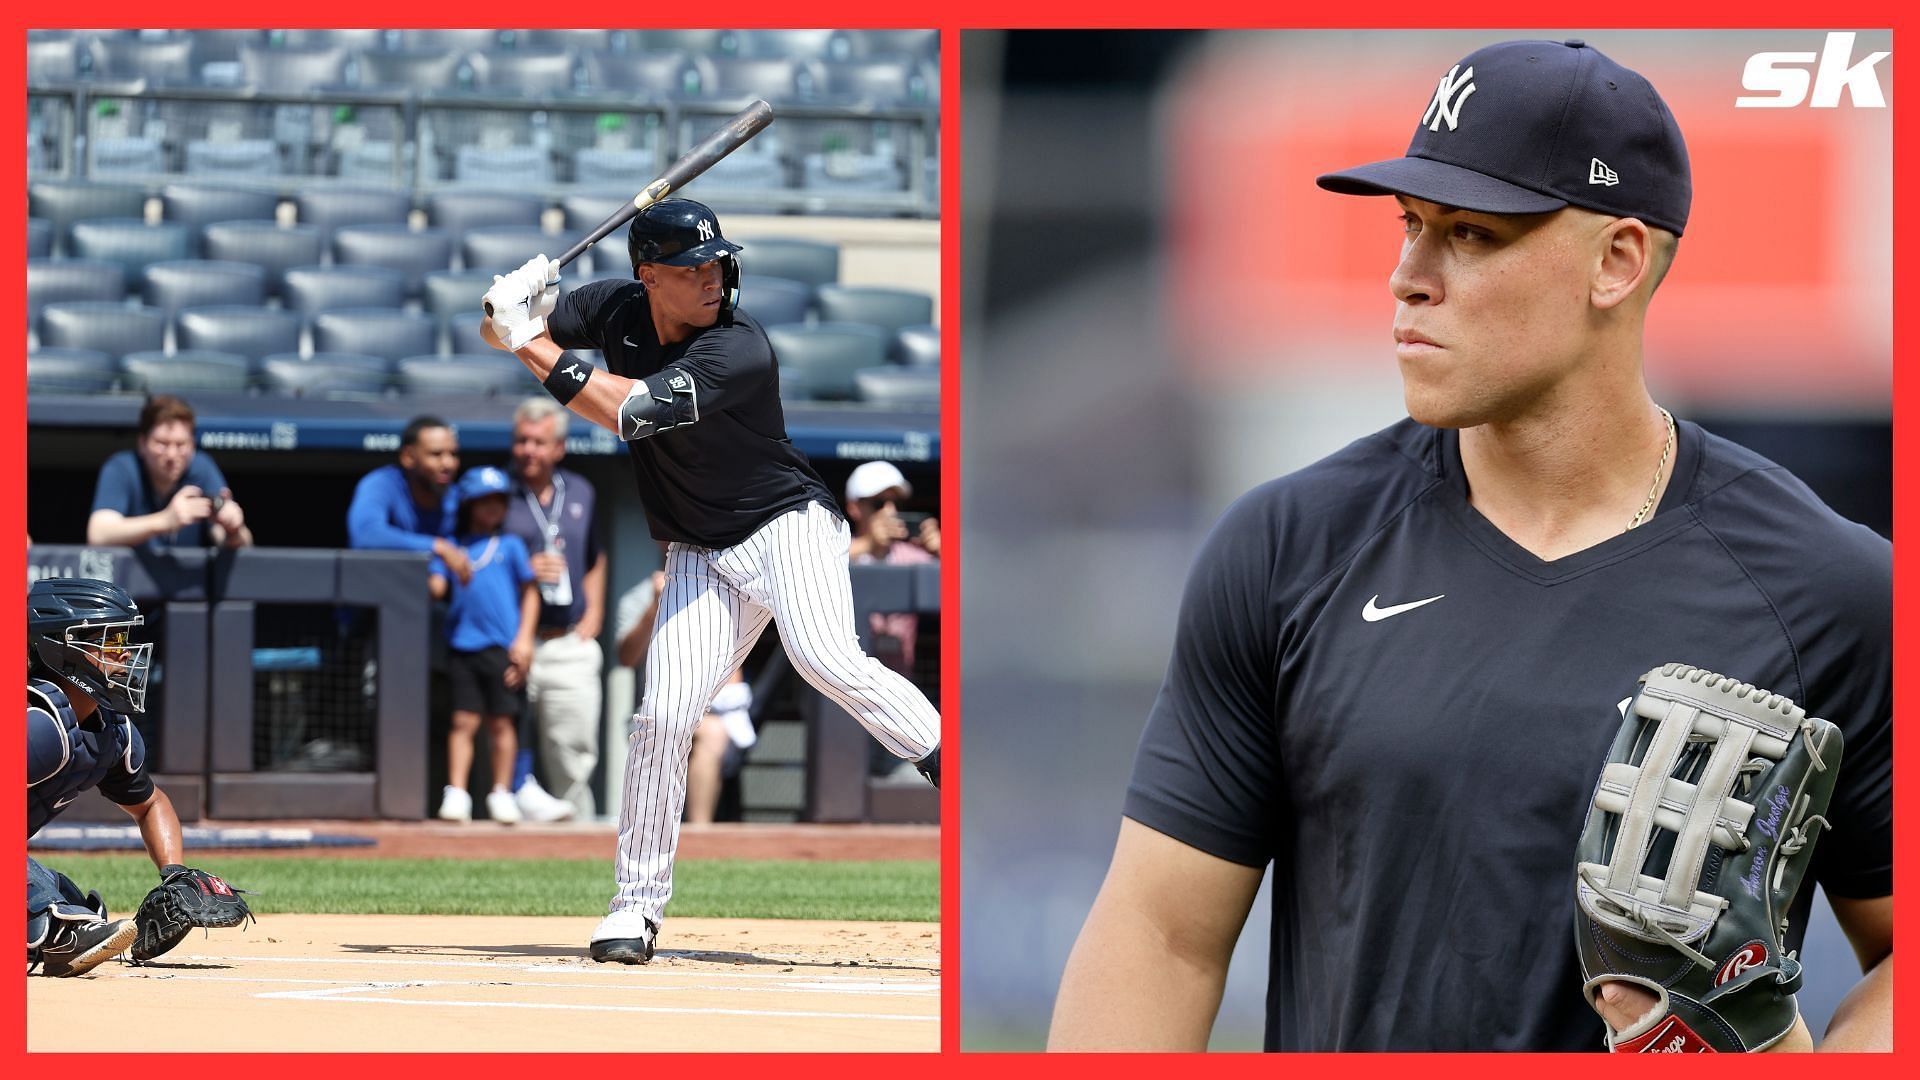 When will New York Yankees fans see Aaron Judge back in the lineup?